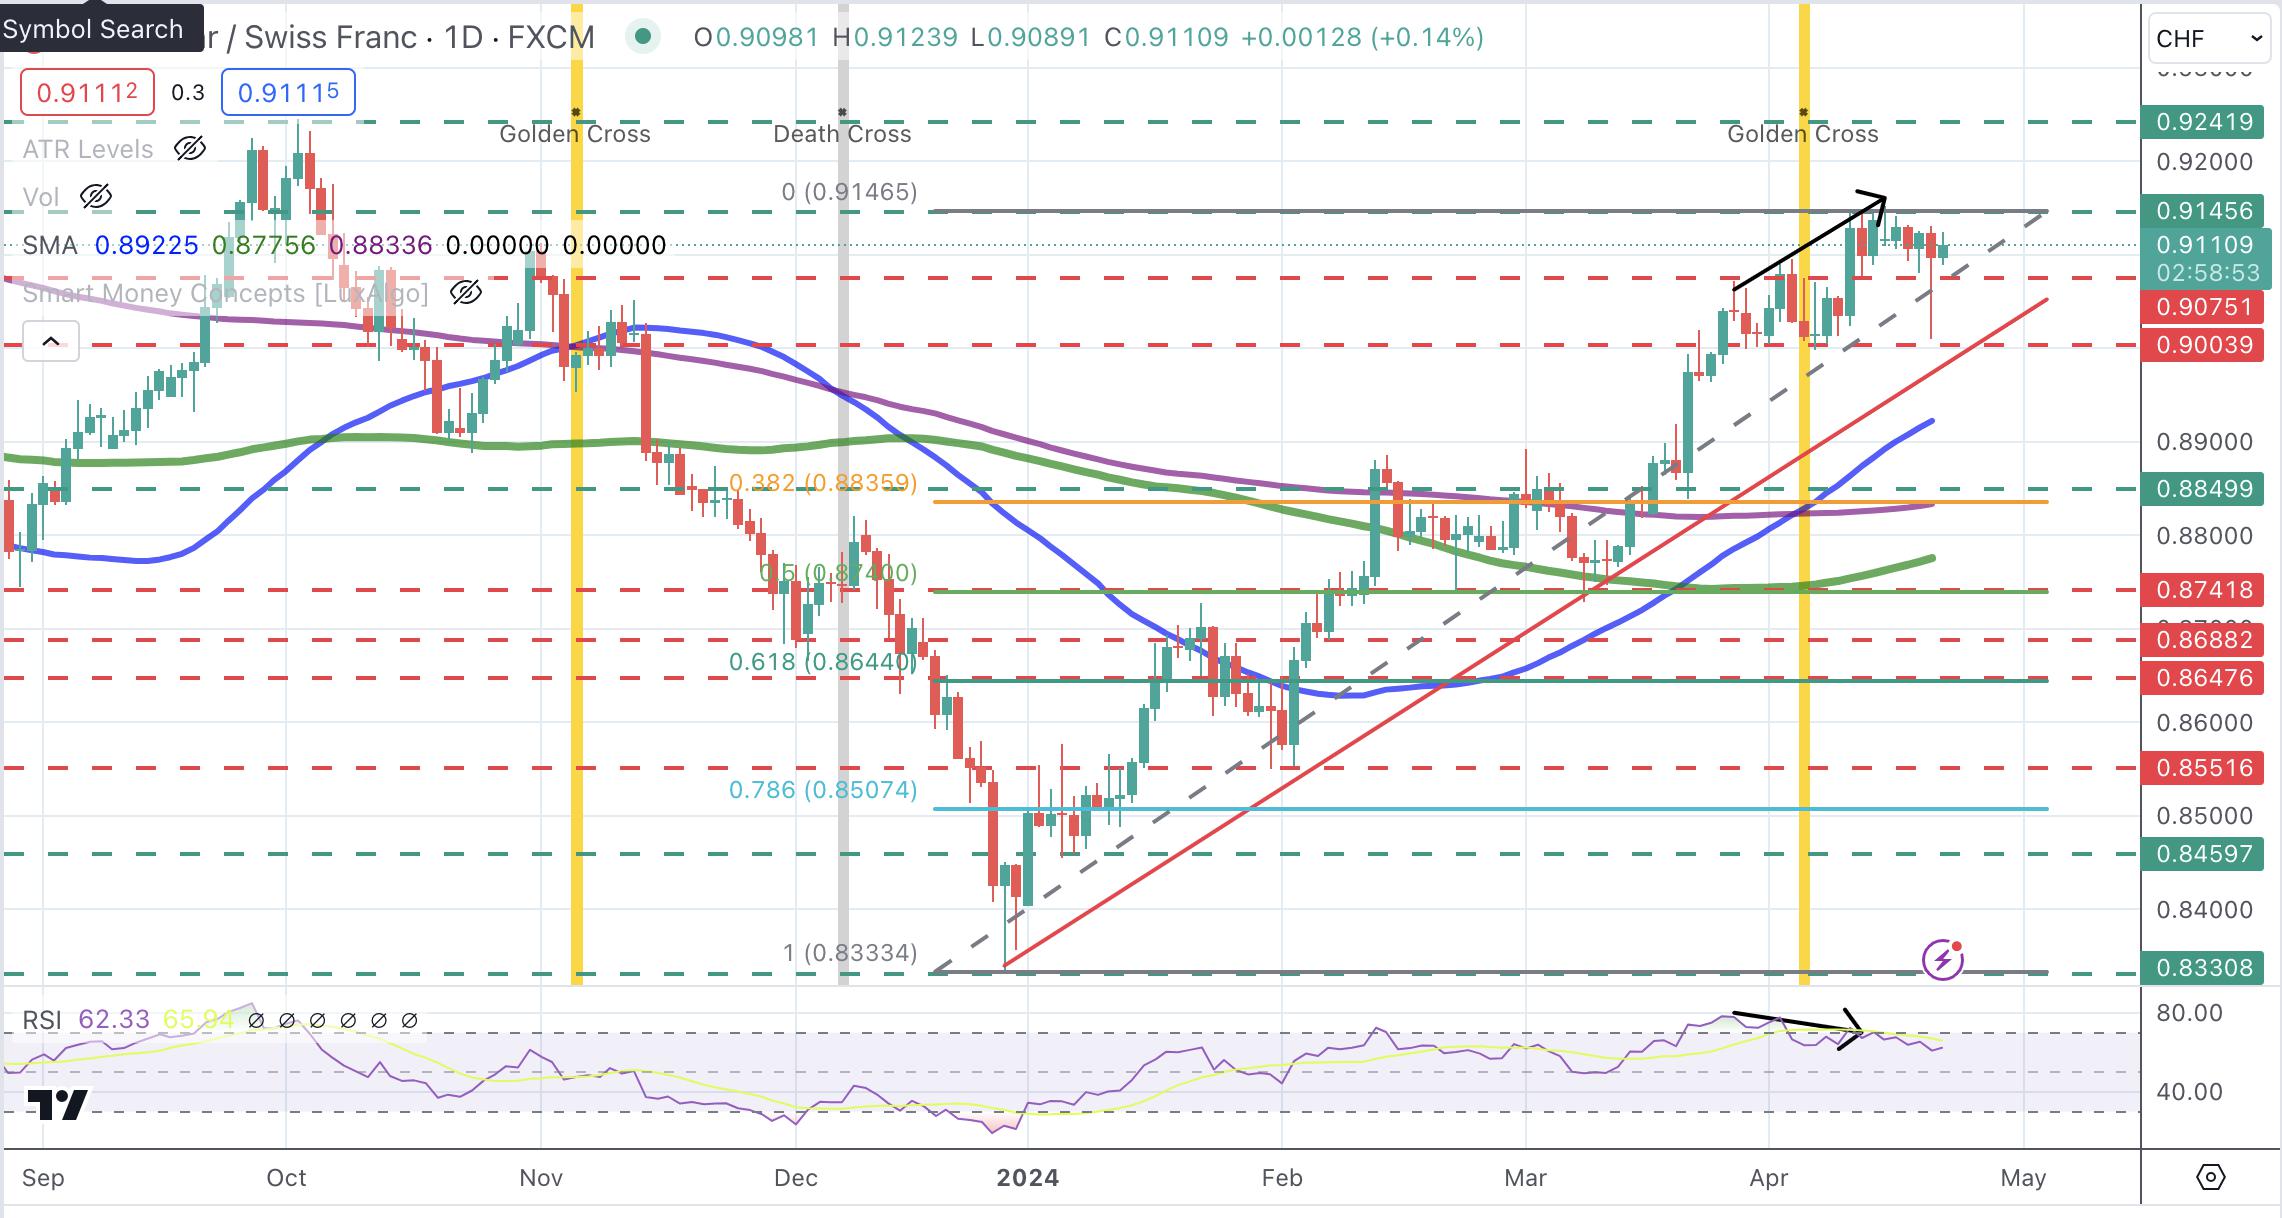 USD/CHF Price Analysis: Bullish trend remains intact with downside attempts capped above 0.9075